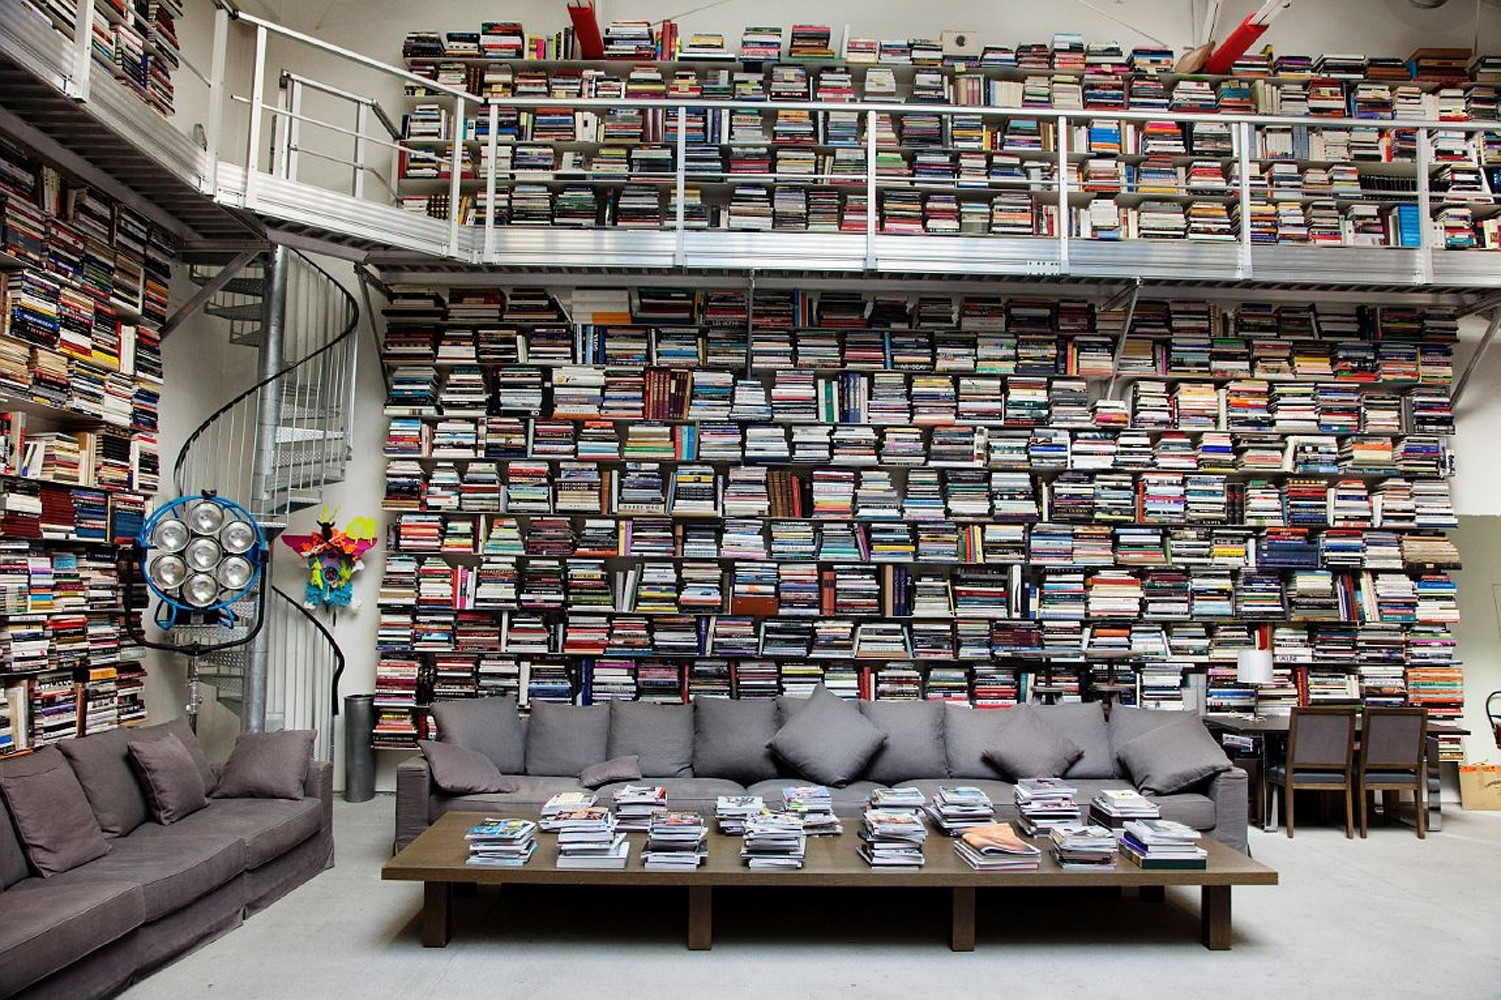 Karl Lagerfeld's Private Library | Photo from anothermag.com | https://anotherimg-dazedgroup.netdna-ssl.com/1501/azure/another-prod/290/2/292550.jpg